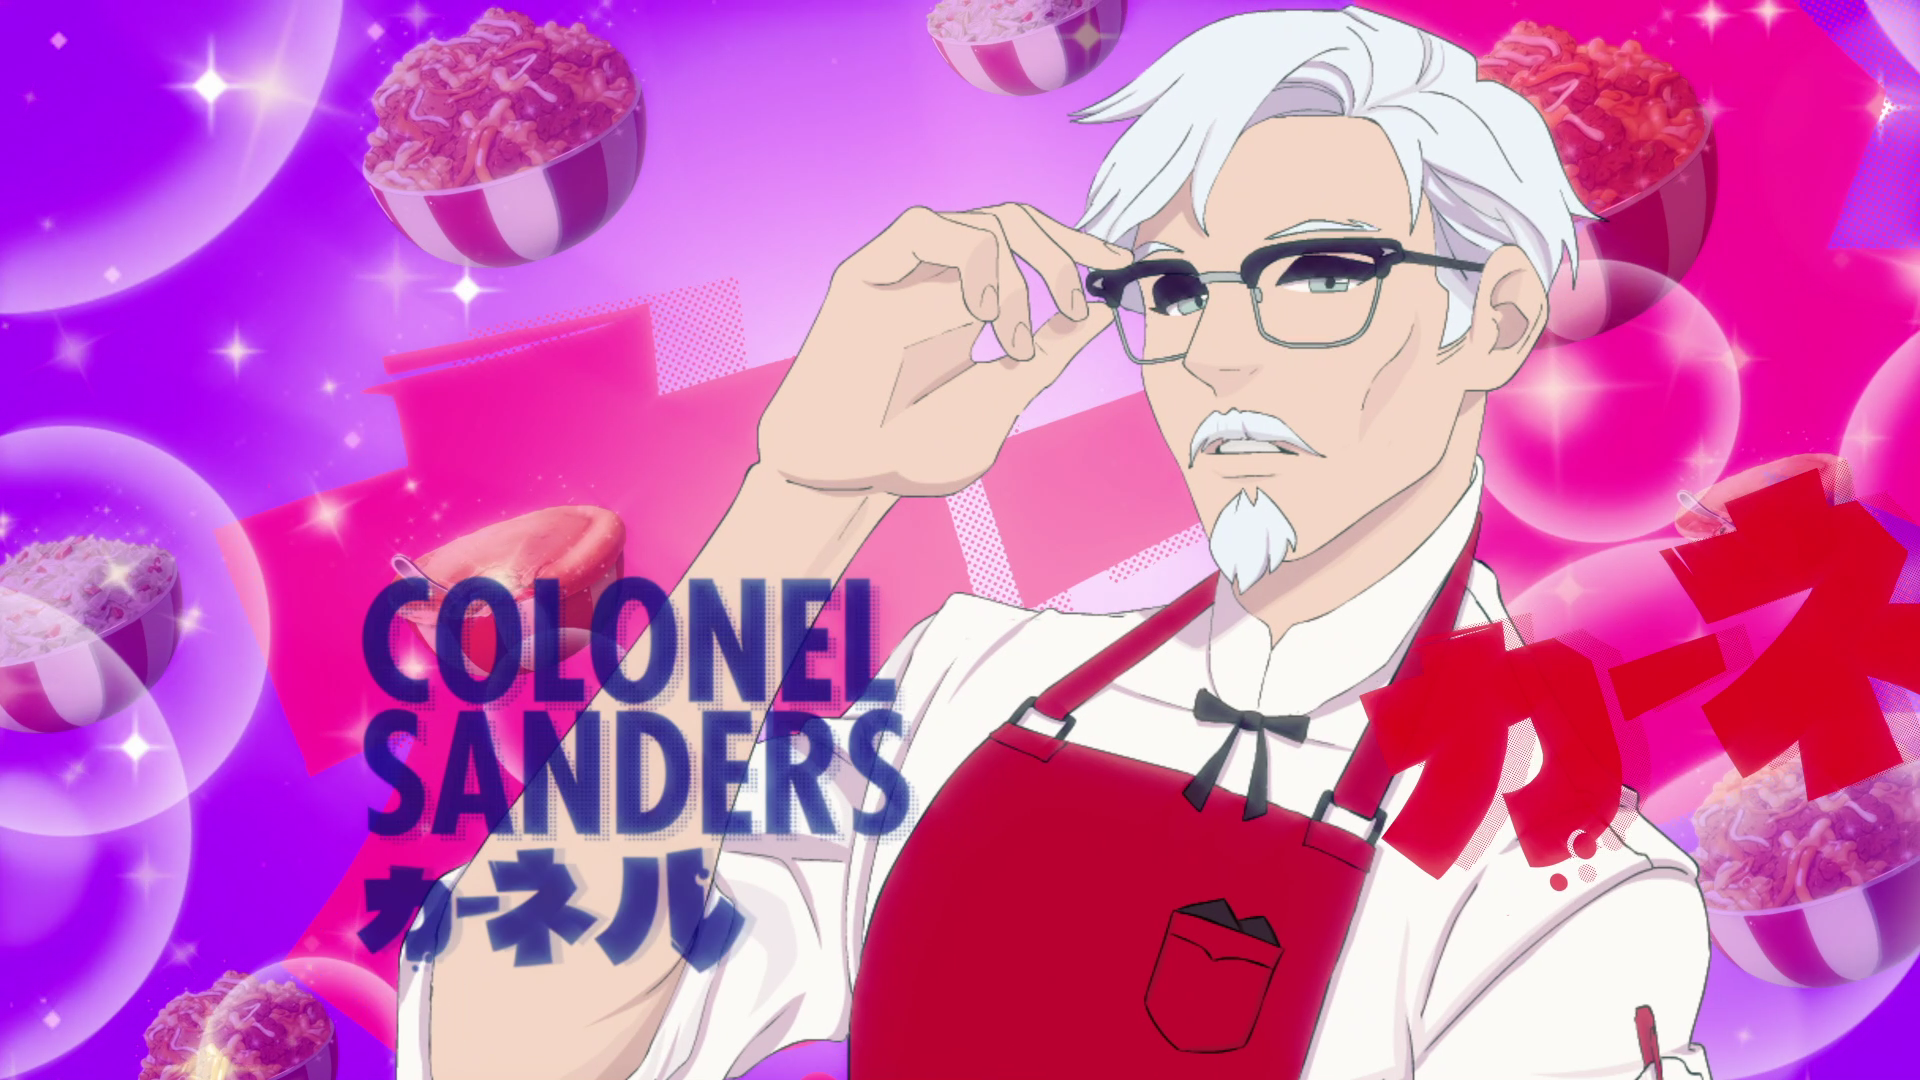 KFC's dating sim cooks up fingerlickin' Colonel Sanders romance, but the recipe feels off【Review】. SoraNews24 -Japan News